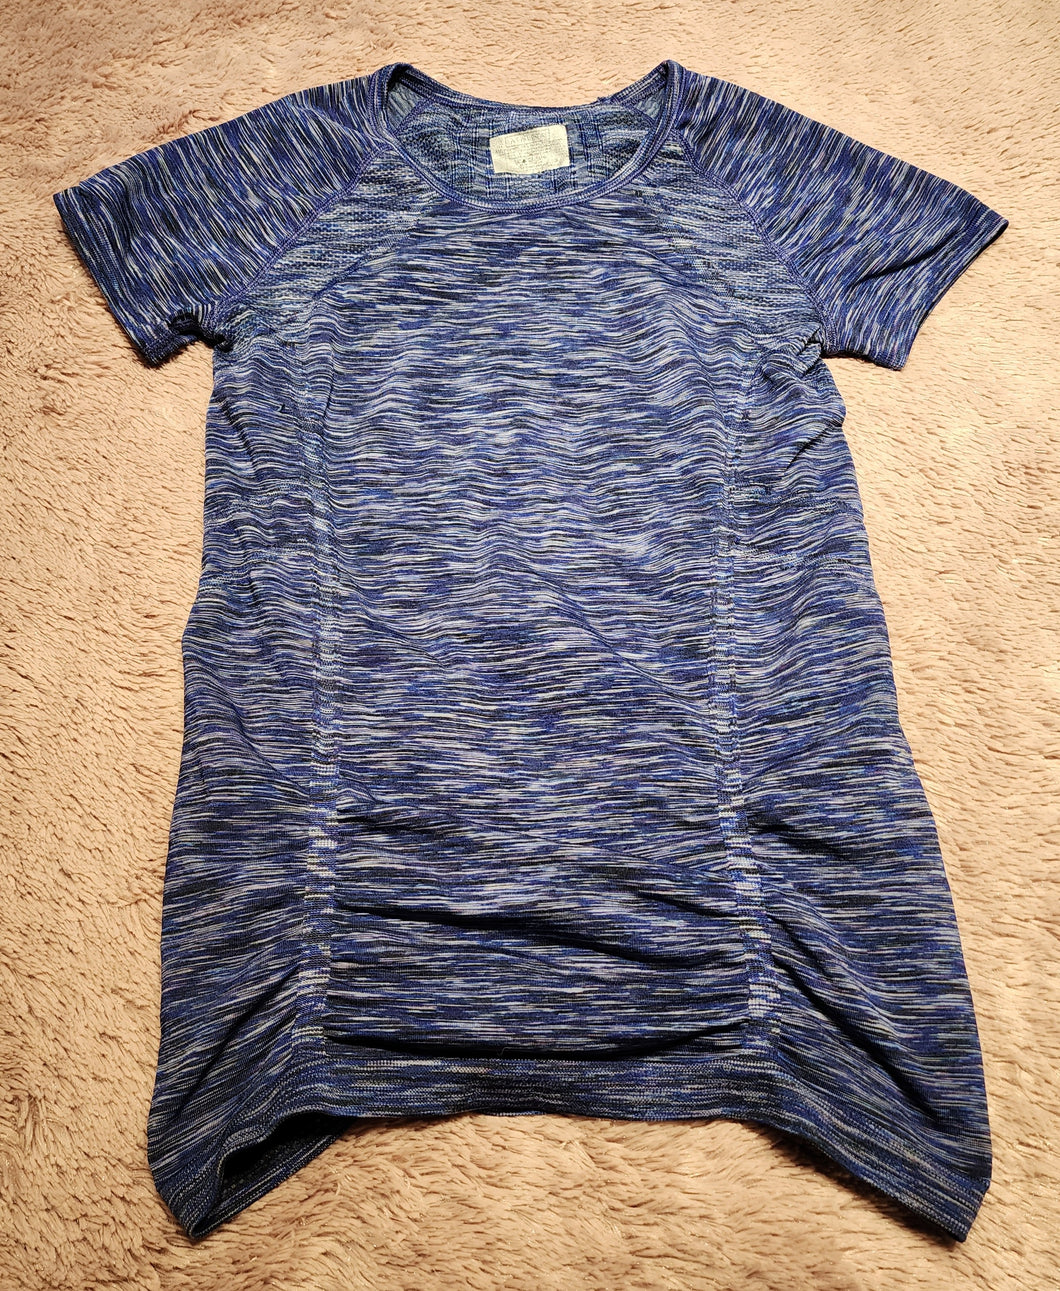 Athleta shirt, size small, blue striped, stretchy,  rusched Adult Small